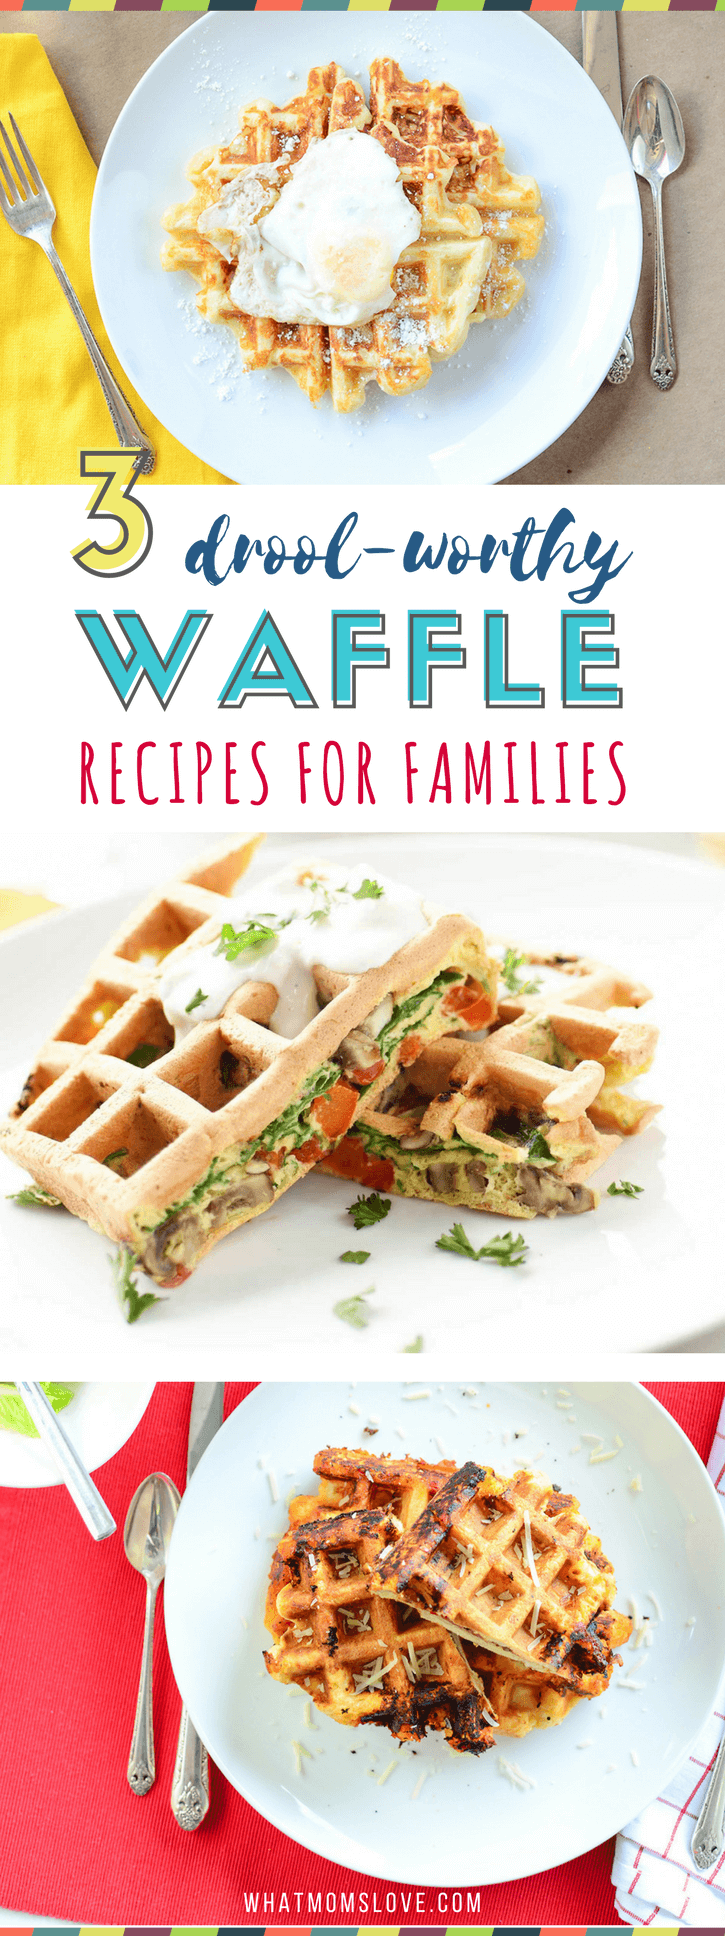 Savory Waffle Recipes for Dinner | Family Friendly Dinner Ideas | Easy, homemade waffle recipes that go beyond the buttermilk or Belgian! Fun meal ideas for kids made in your waffle iron - customizable for picky eaters!